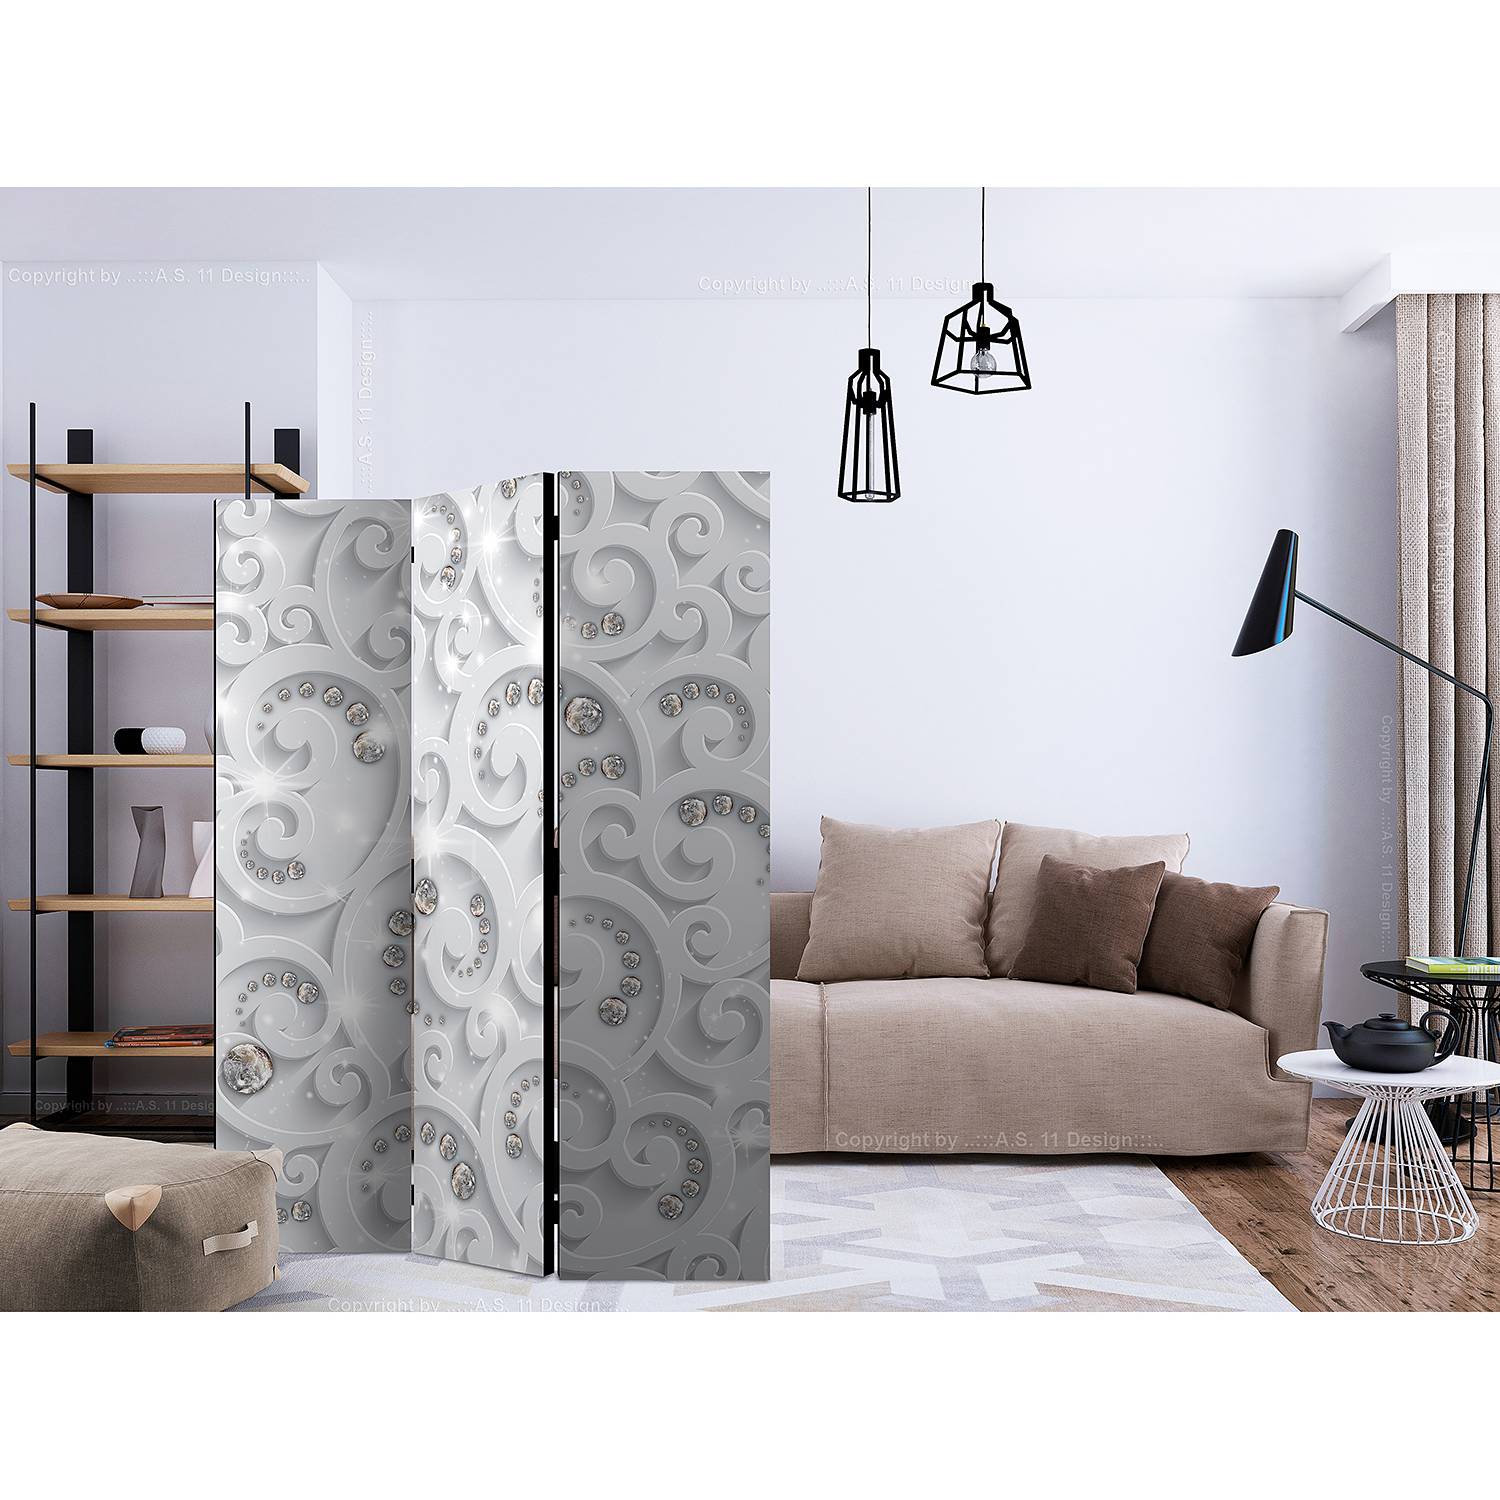 Paravent Abstract Glamor von home24